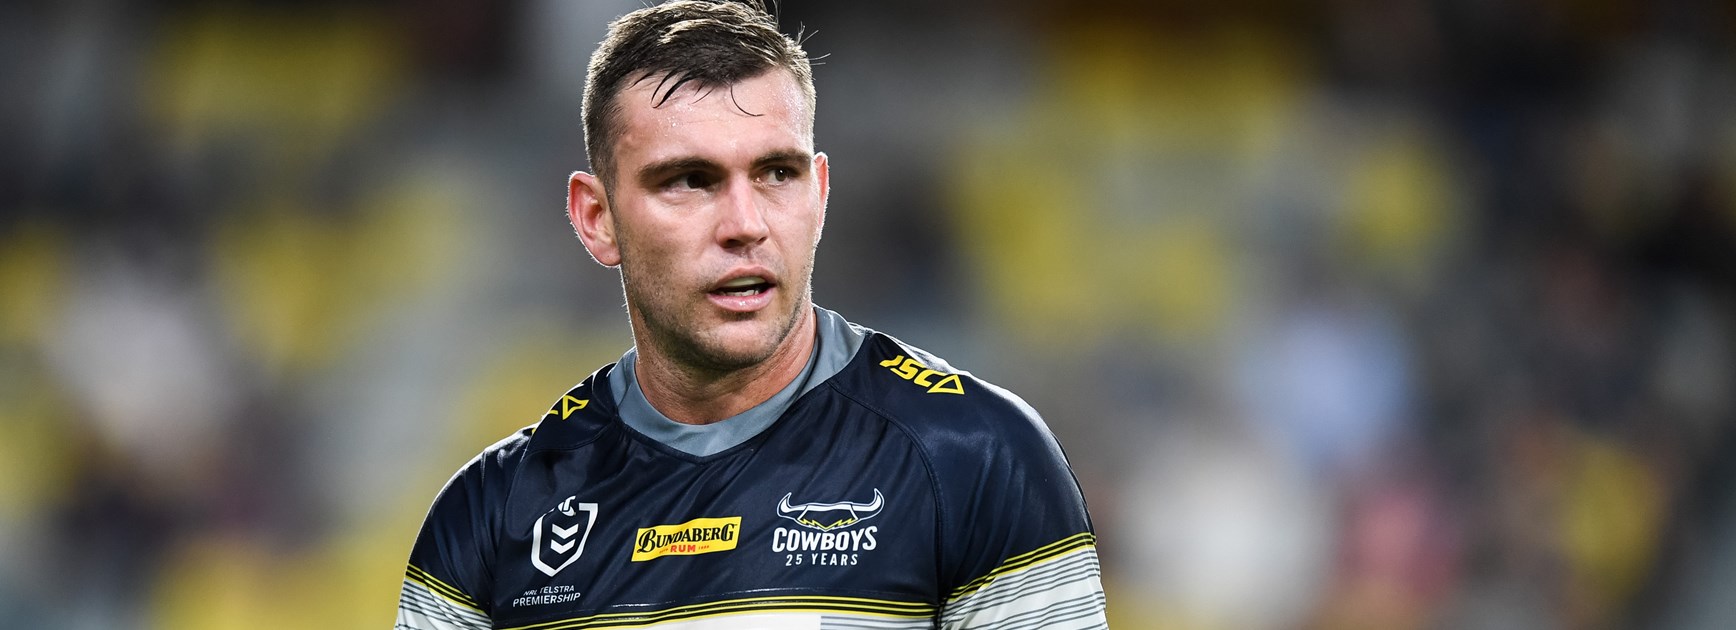 Local boy made good: Feldt recognised for helping Townsville community